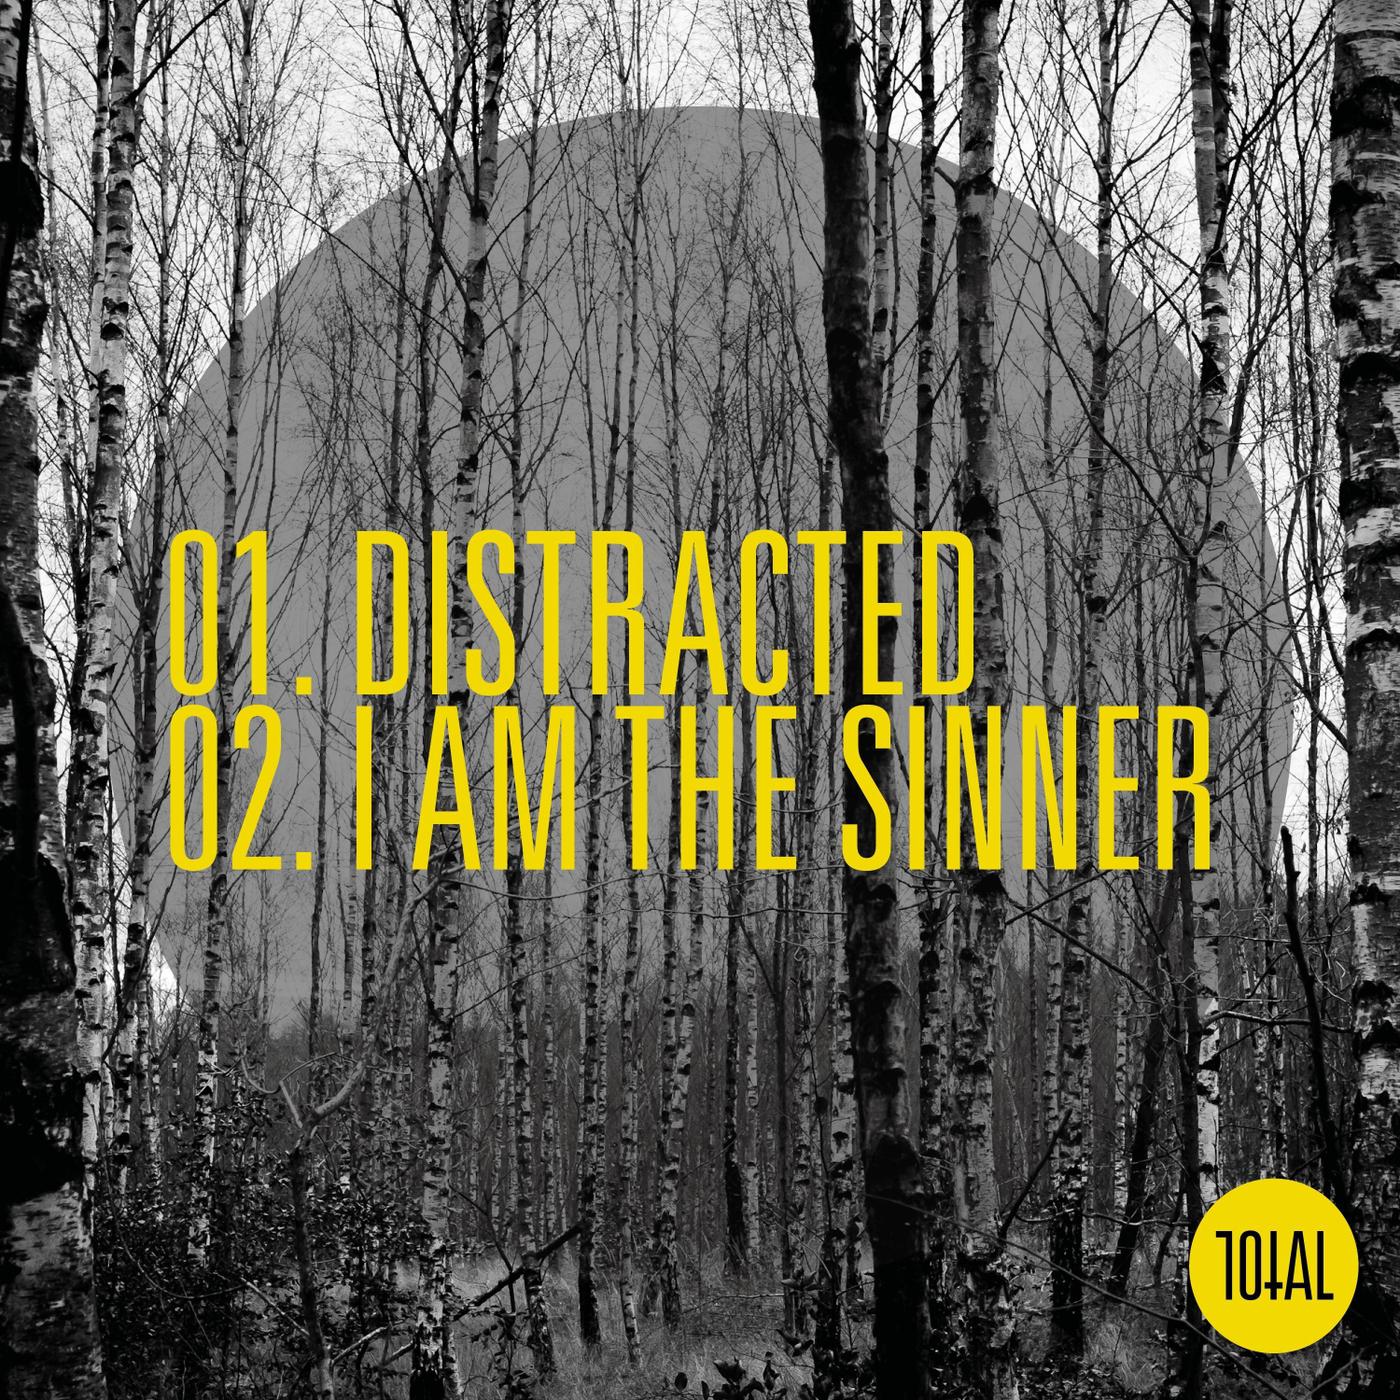 Total - I Am the Sinner